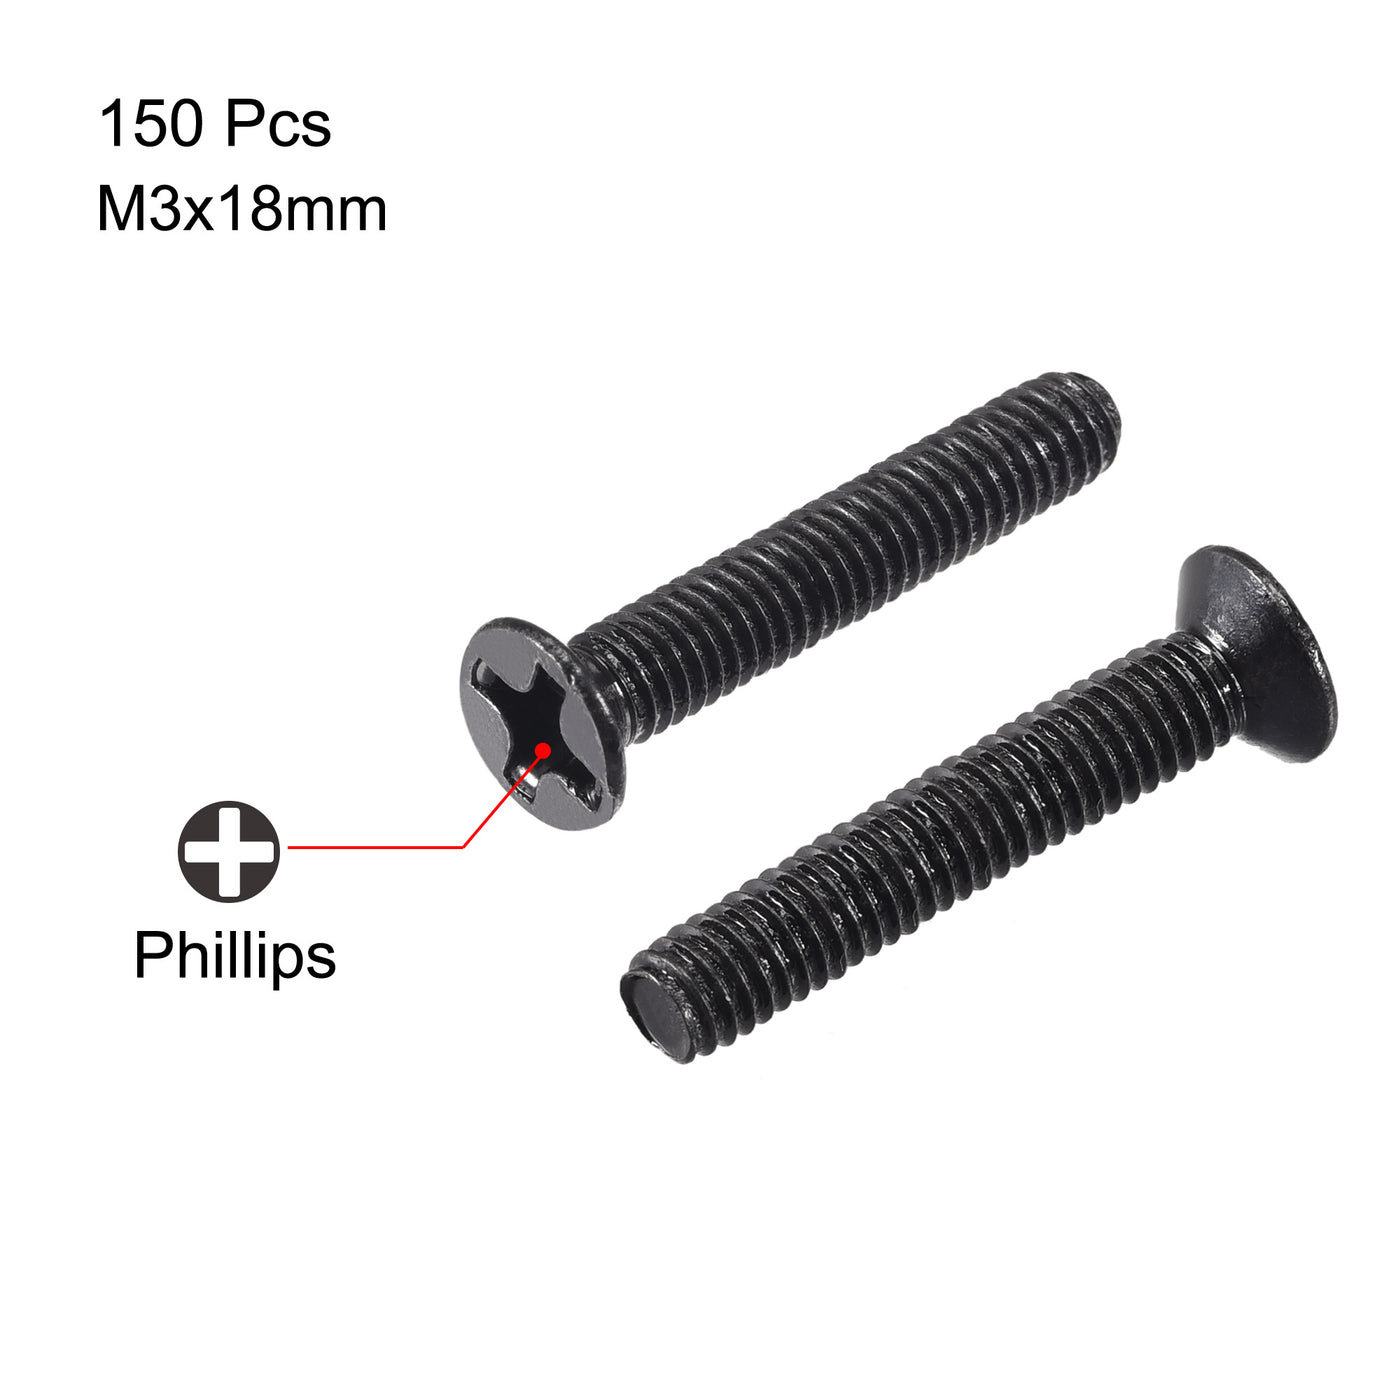 uxcell Uxcell M3 x 18mm Phillips Flat Head Screws Carbon Steel Machine Screws Black for Home Office Computer Case Appliance Equipment 150pcs